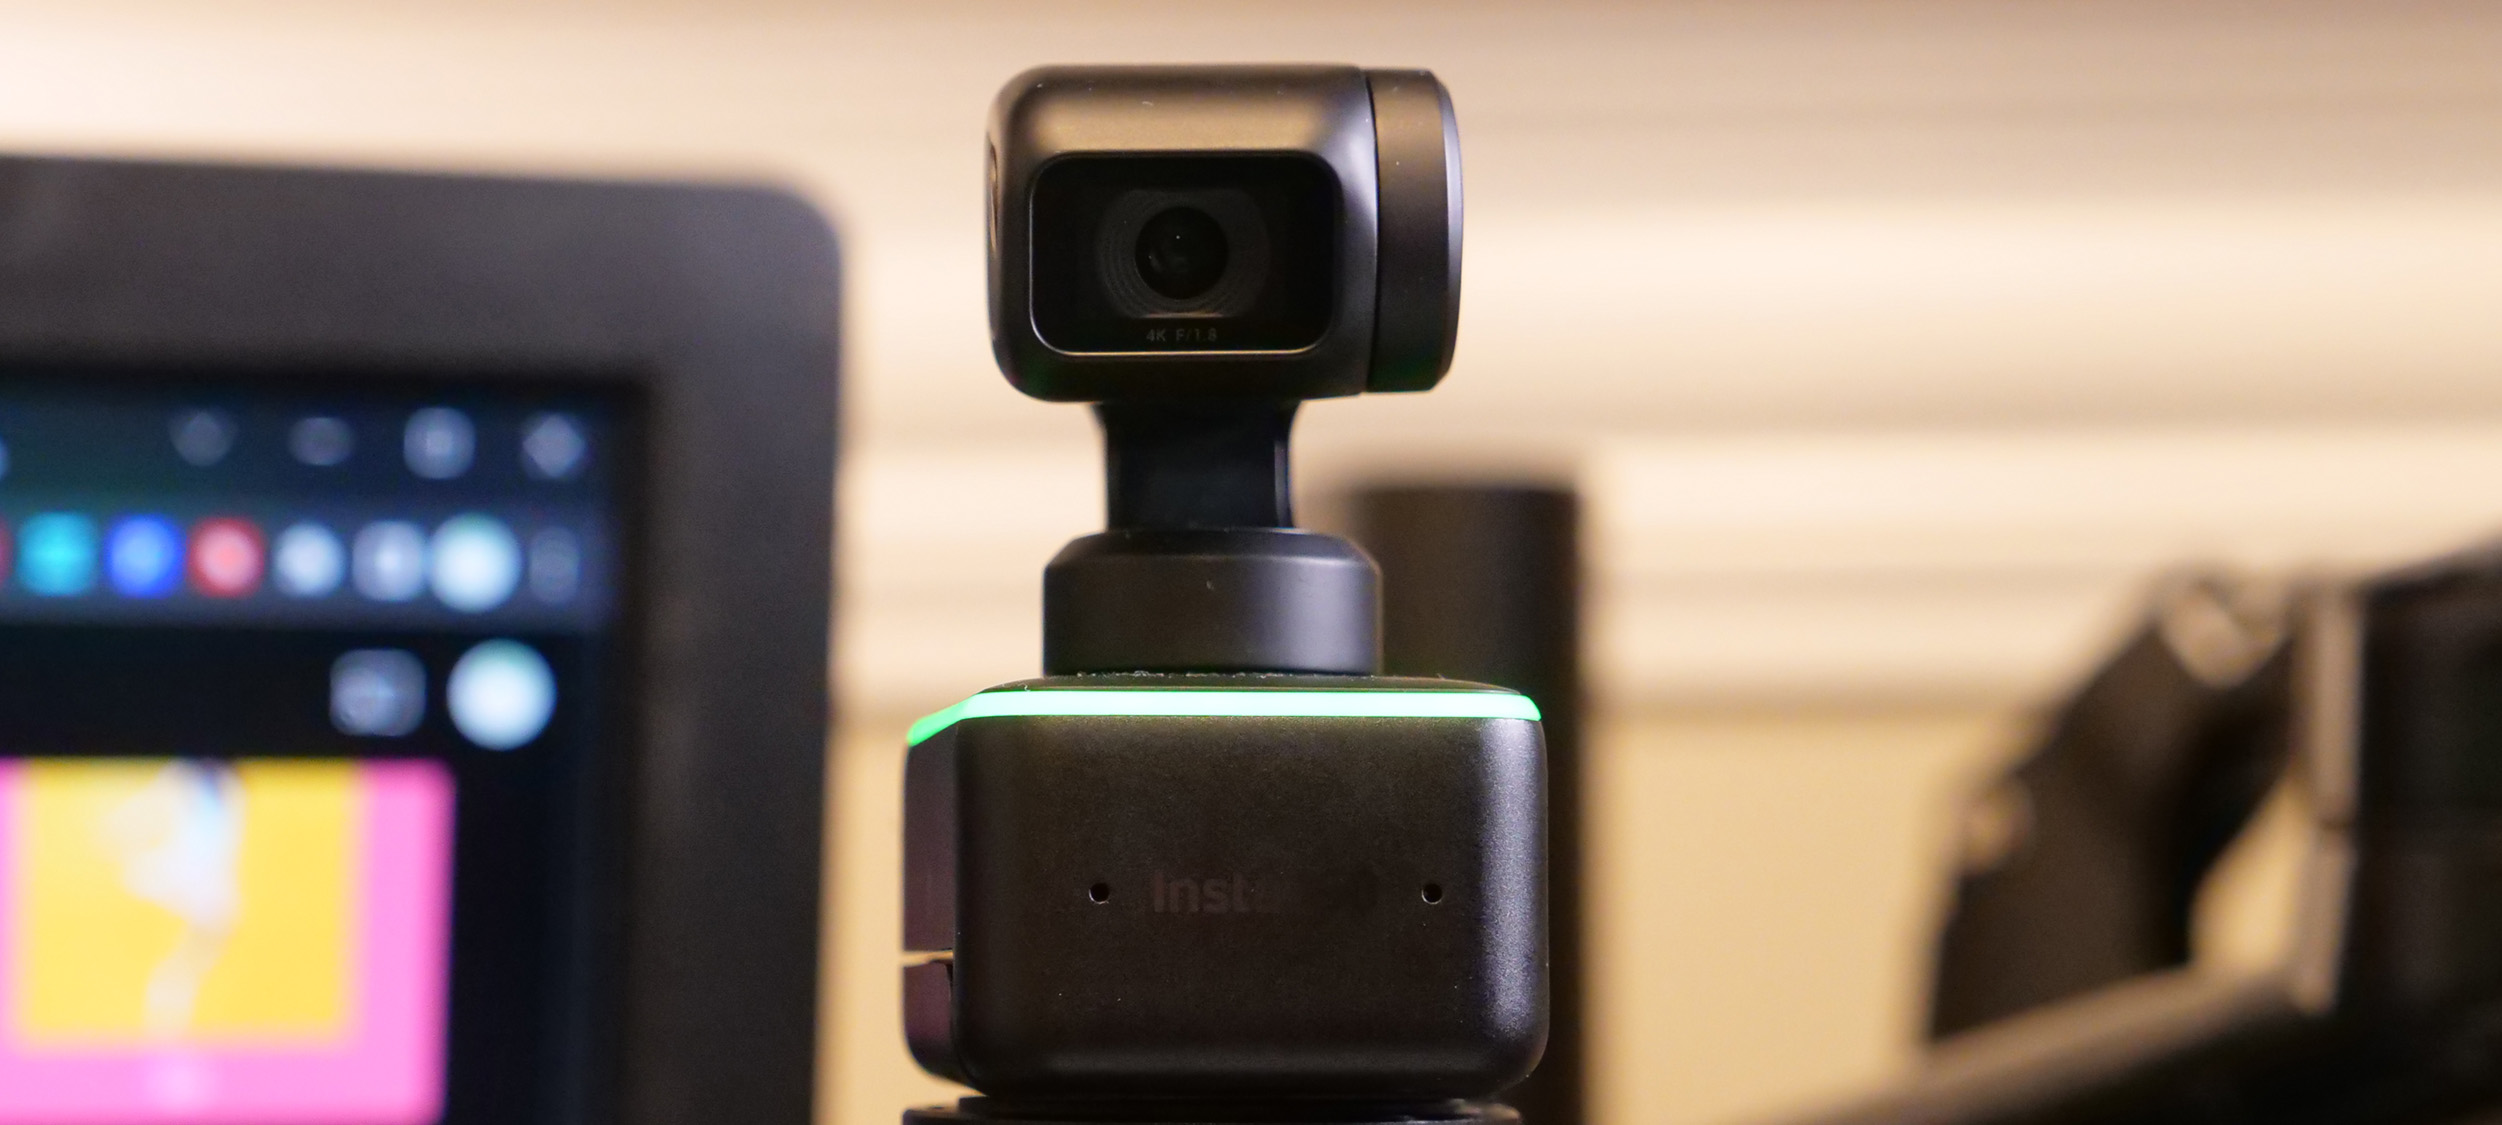 Insta360 Link webcam review: Astounding image and innovation | Laptop Mag